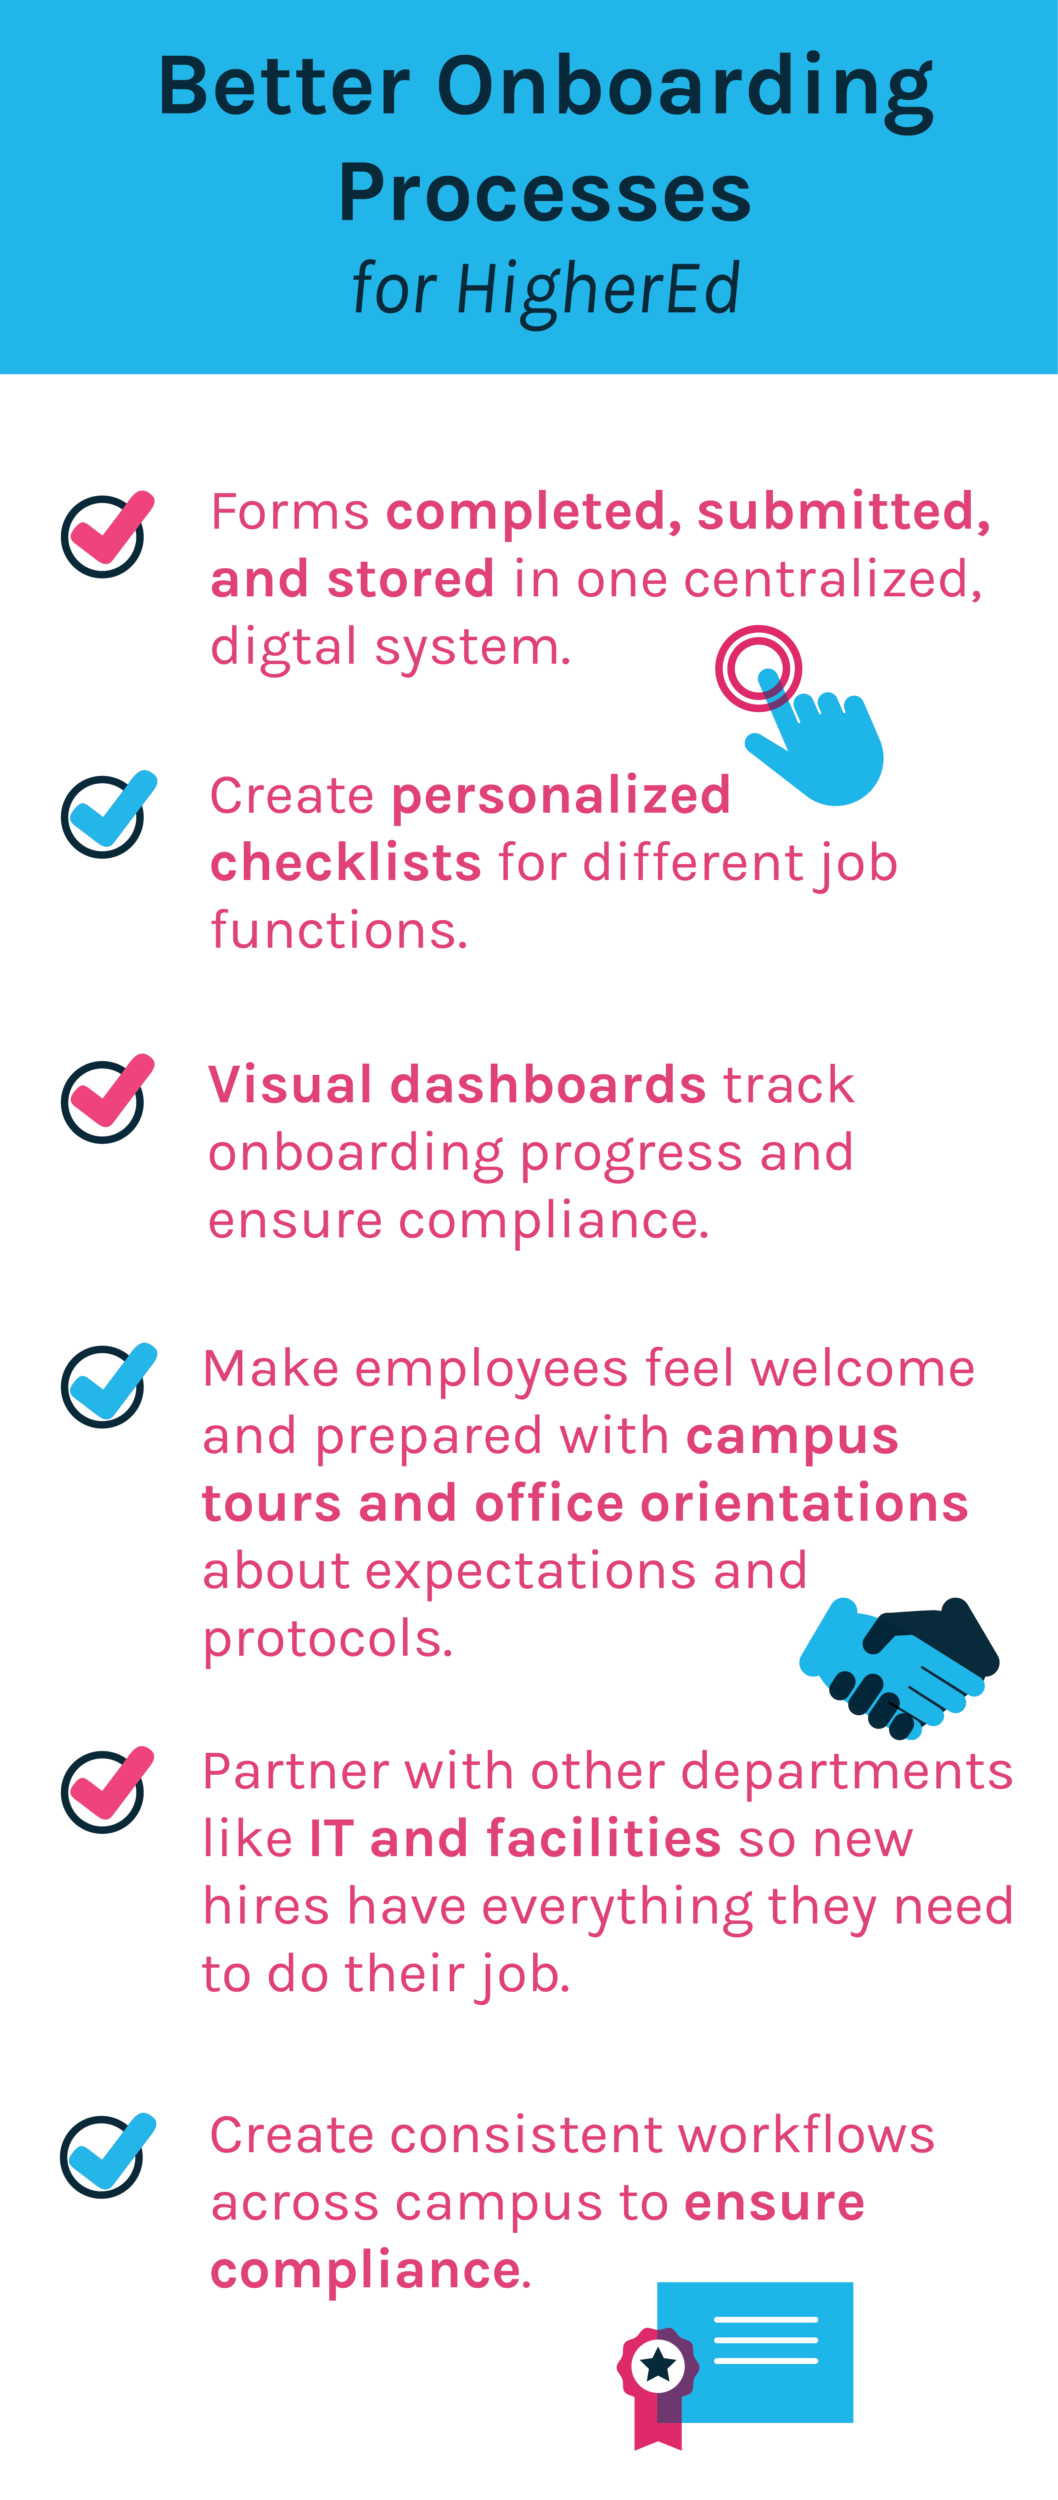 Infographic detailing the steps of onboarding and better onboarding processes for highered